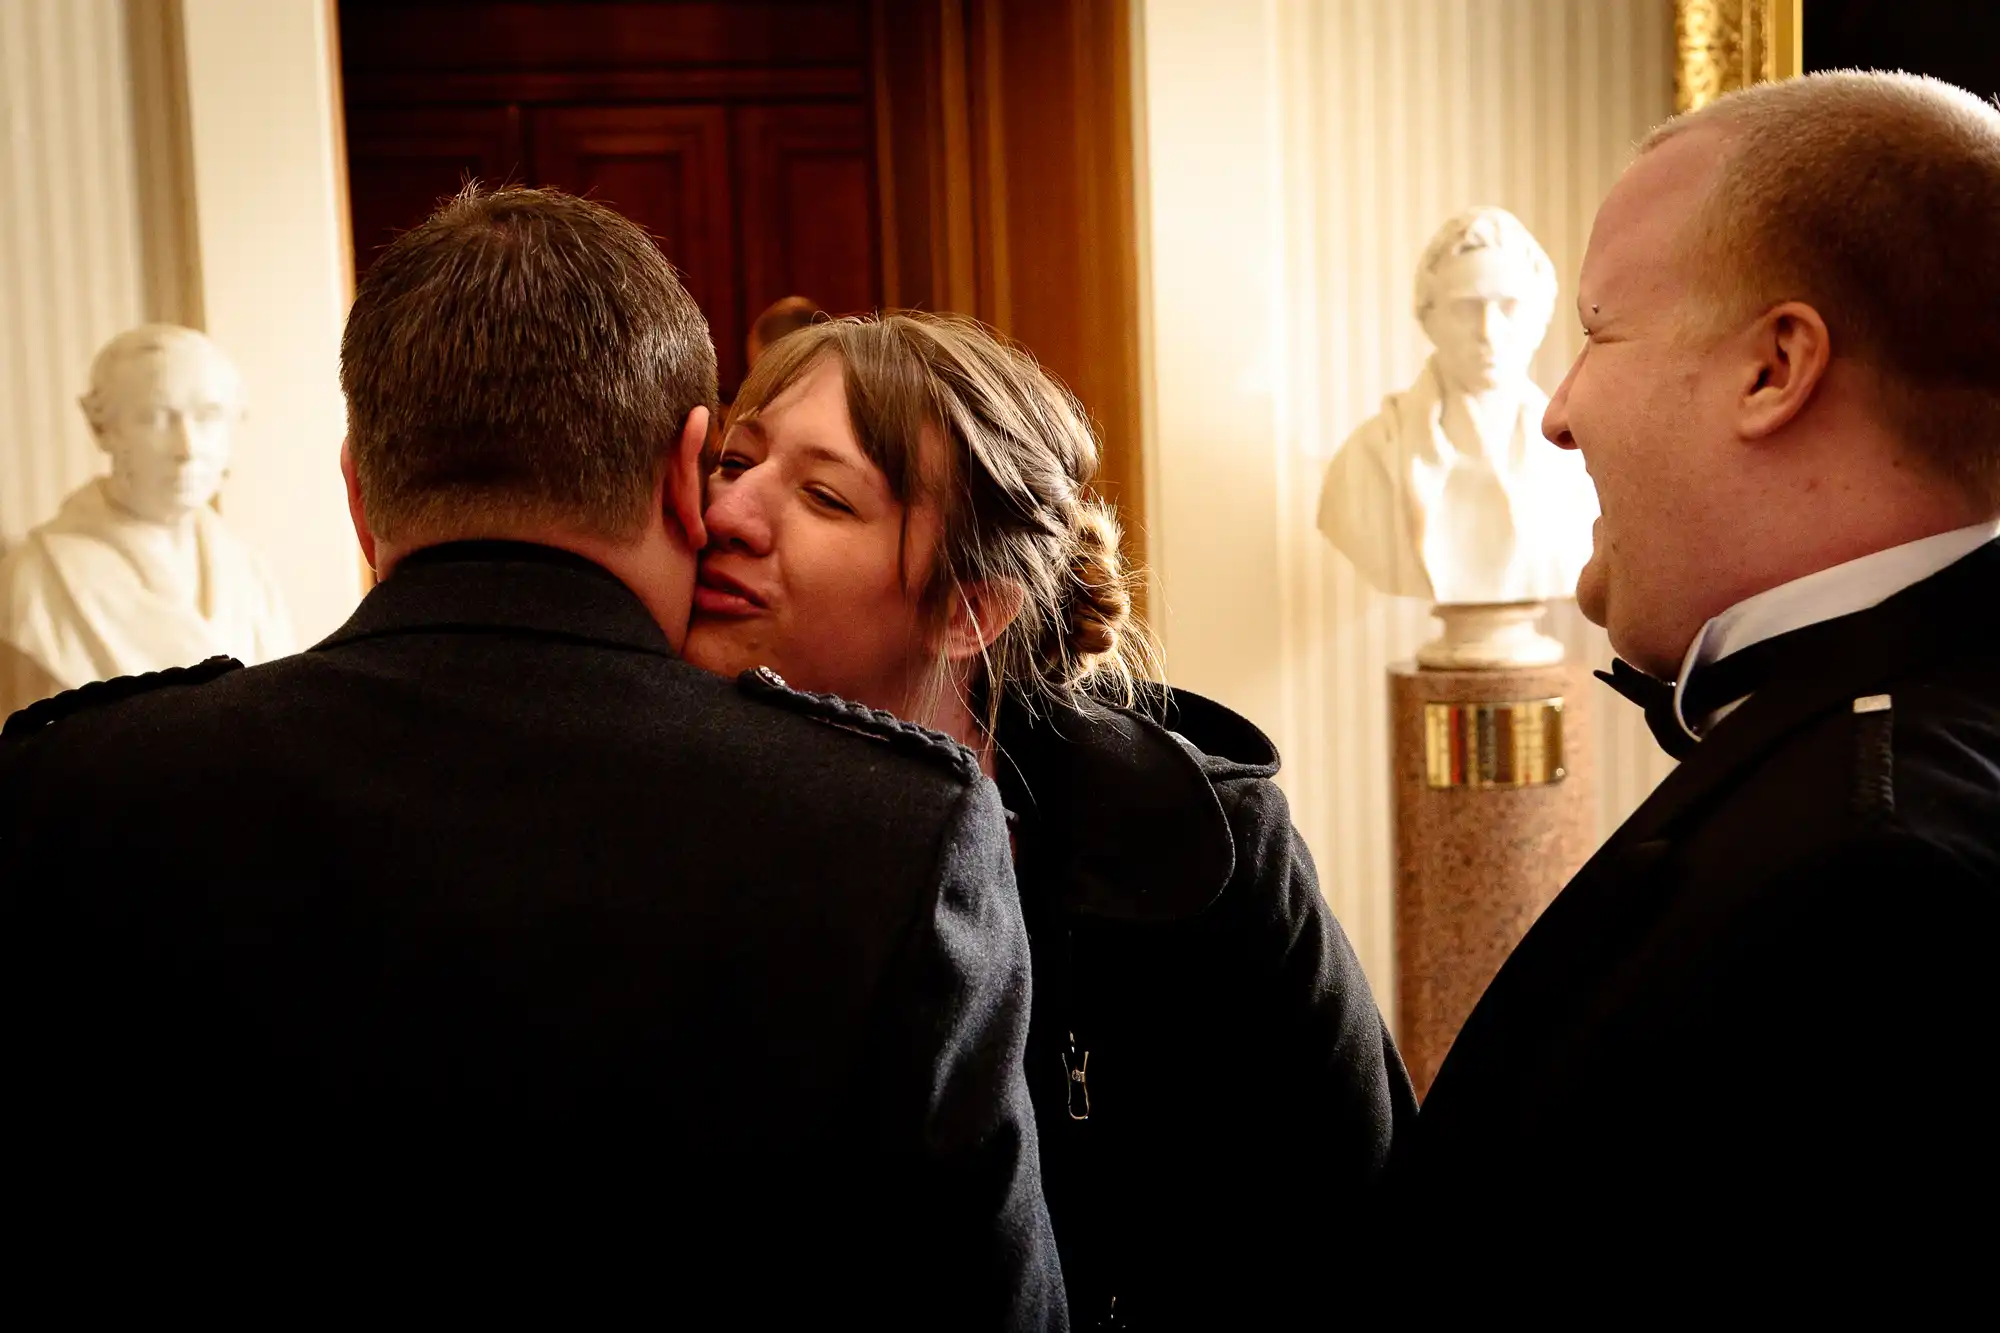 A woman kisses a man on the cheek inside a warmly lit room adorned with bust sculptures, while another man looks on, smiling.